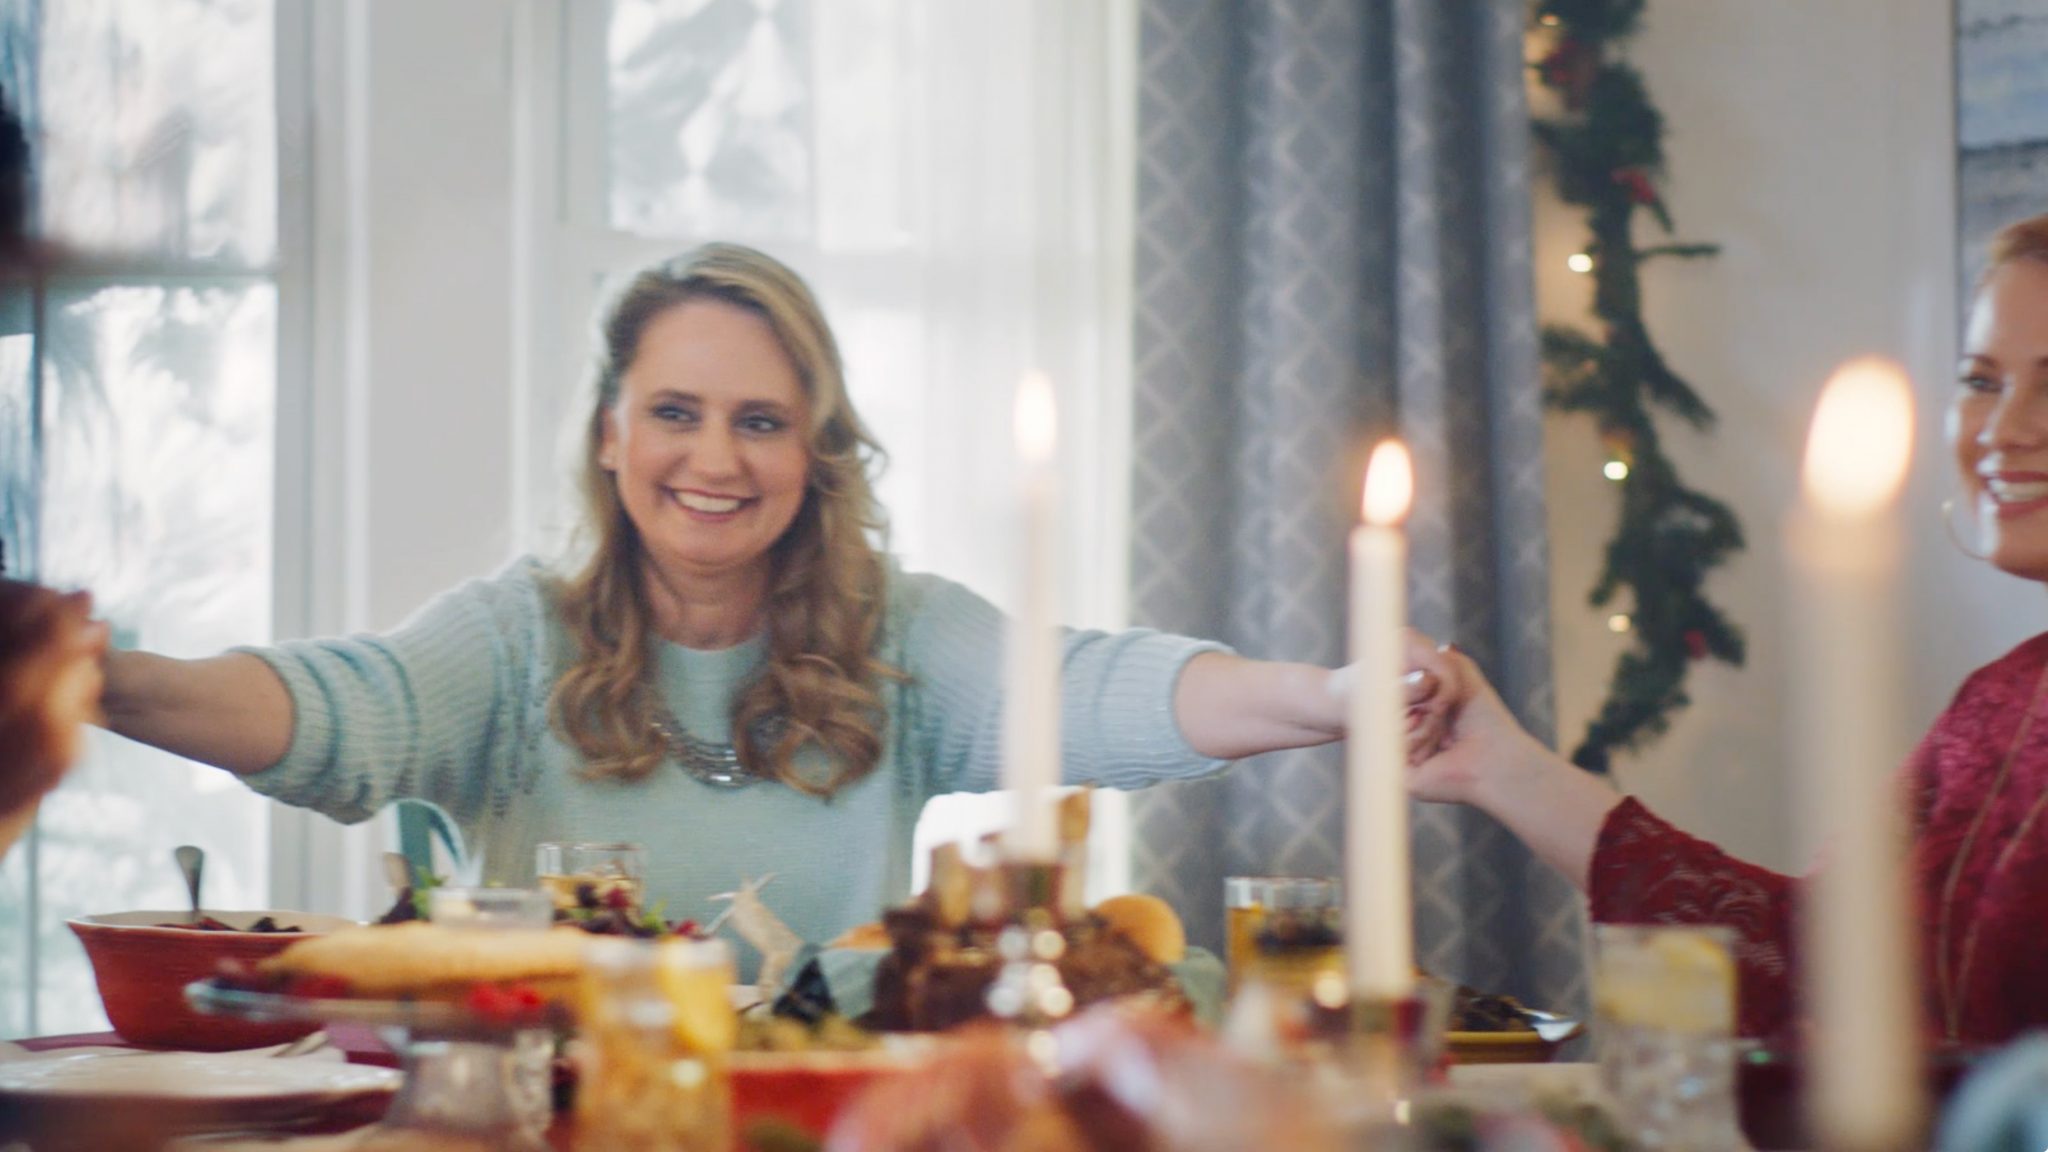 JCPenney associate Sena Longley is featured in this year’s holiday commercial